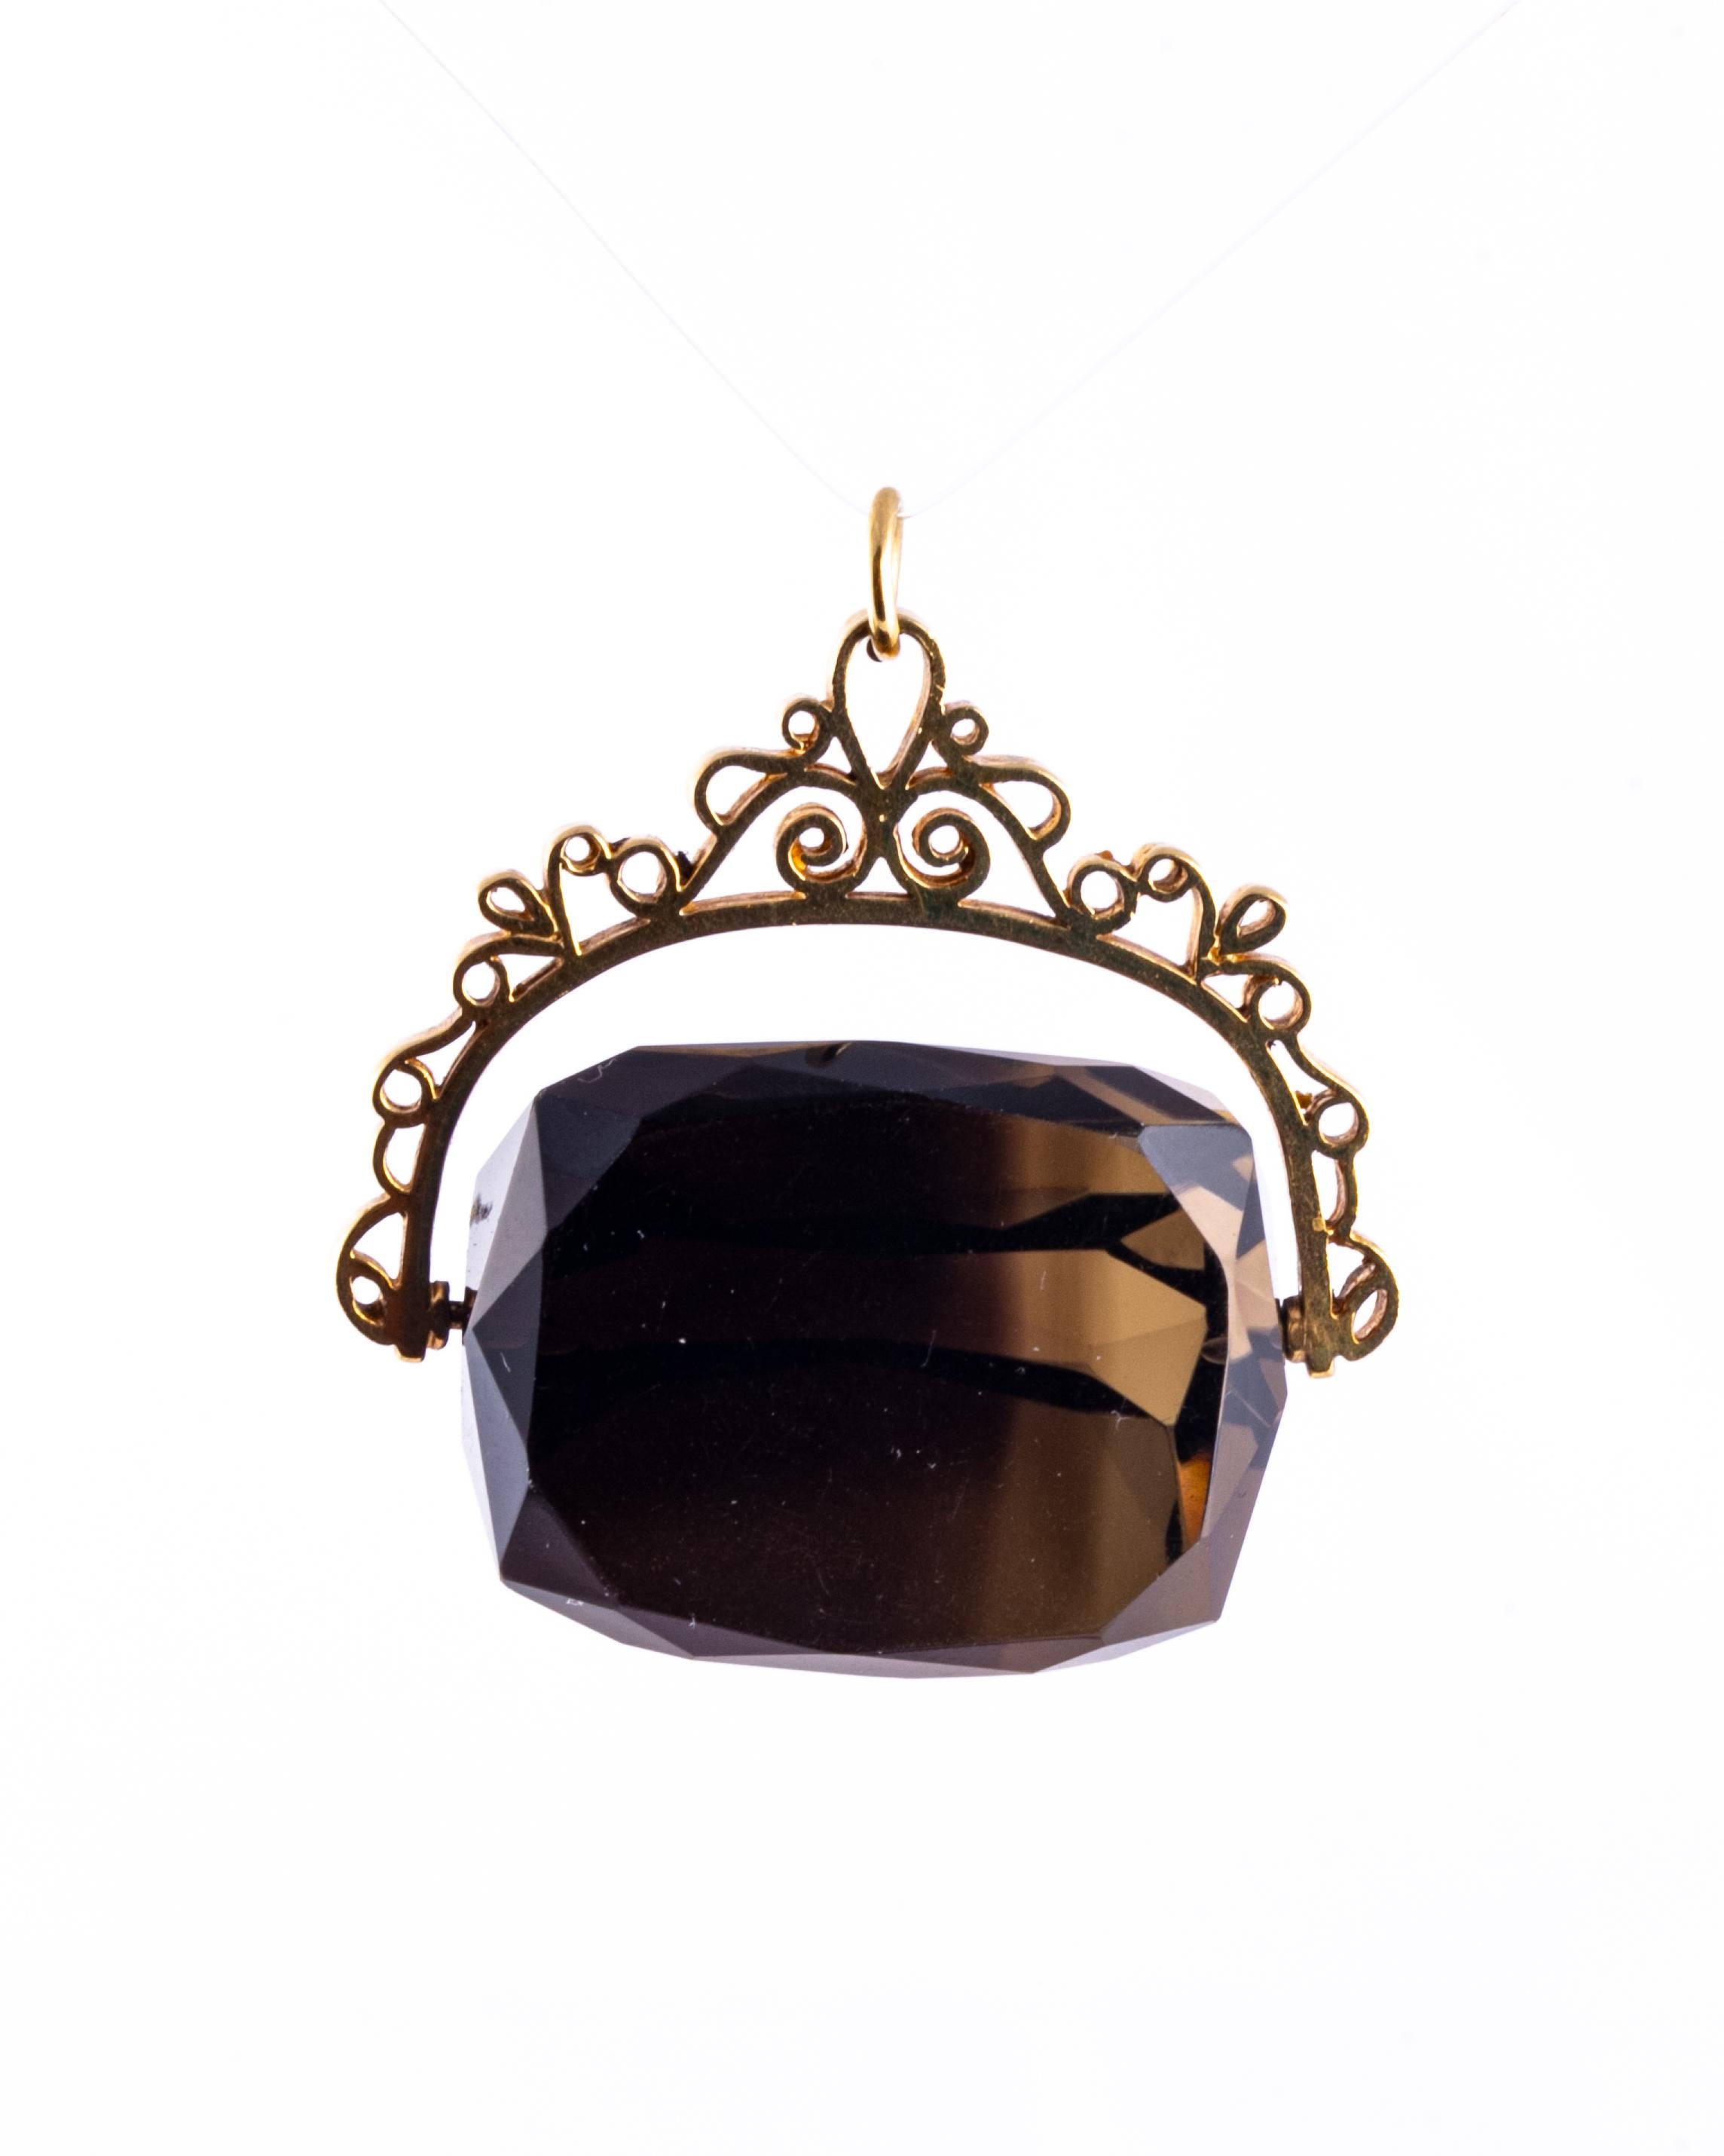 This giant swivel fob holds a smokey quartz stone and the frame and loop is modelled out of 9ct gold and has stunning moulded detail and a grand moulded loop. 

Stone Width: 30mm
Height including Loop: 40mm

Weight: 23.93g 